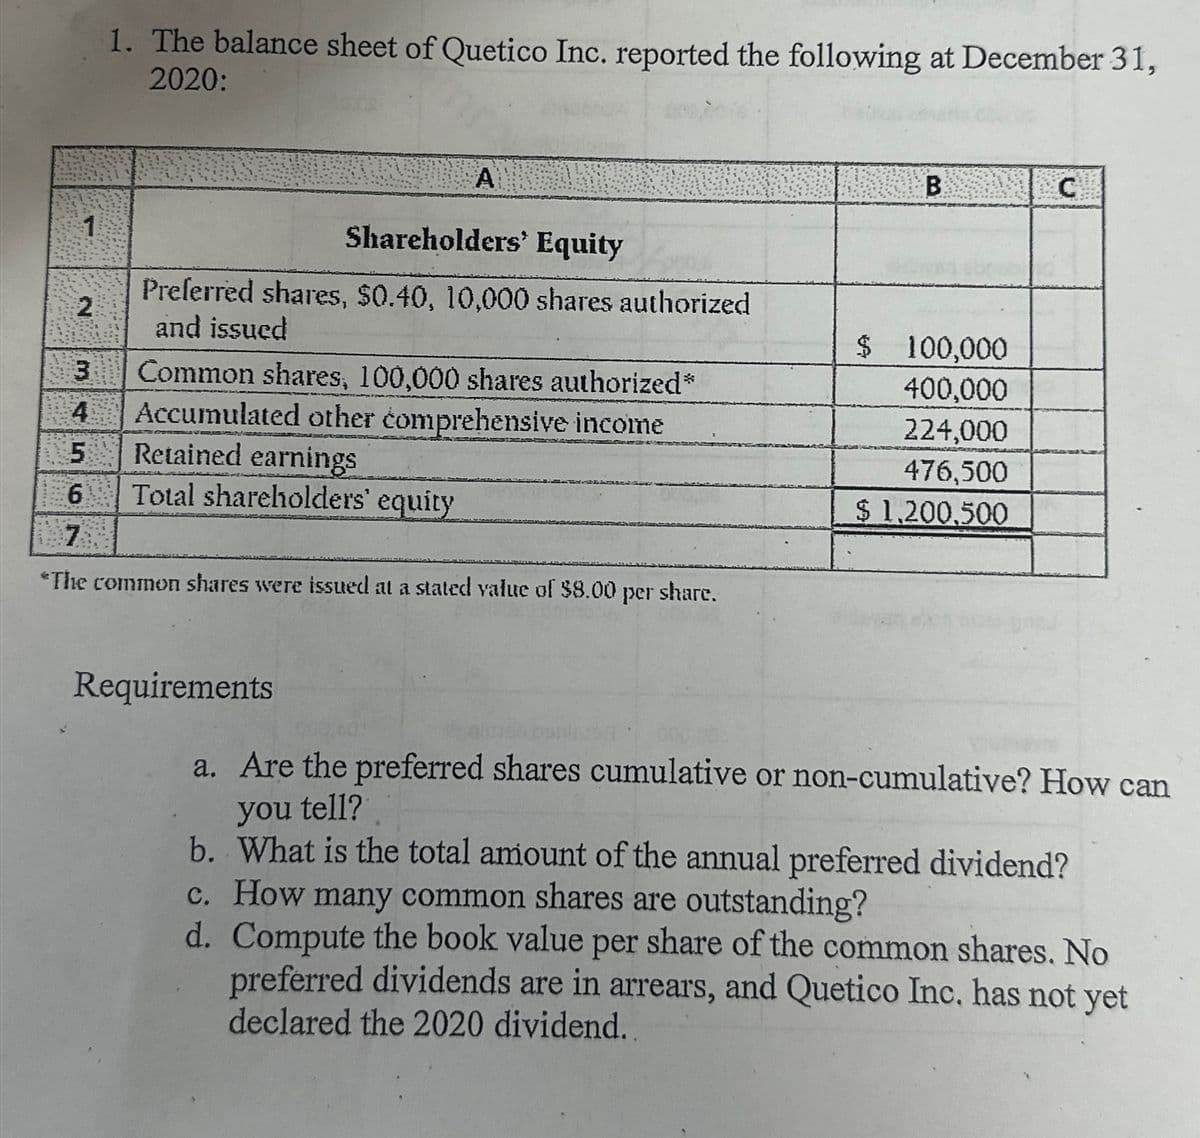 1. The balance sheet of Quetico Inc. reported the following at December 31,
2020:
A
Shareholders' Equity
B
C
Preferred shares, $0.40, 10,000 shares authorized
2
and issued
$ 100,000
3
Common shares, 100,000 shares authorized*
400,000
45
Accumulated other comprehensive income
Retained earnings
224,000
476,500
6
Total shareholders' equity
7
$ 1,200,500
*The common shares were issued at a stated value of $8.00 per share.
Requirements
a. Are the preferred shares cumulative or non-cumulative? How can
you tell?
b. What is the total amount of the annual preferred dividend?
c. How many common shares are outstanding?
d. Compute the book value per share of the common shares. No
preferred dividends are in arrears, and Quetico Inc. has not yet
declared the 2020 dividend..